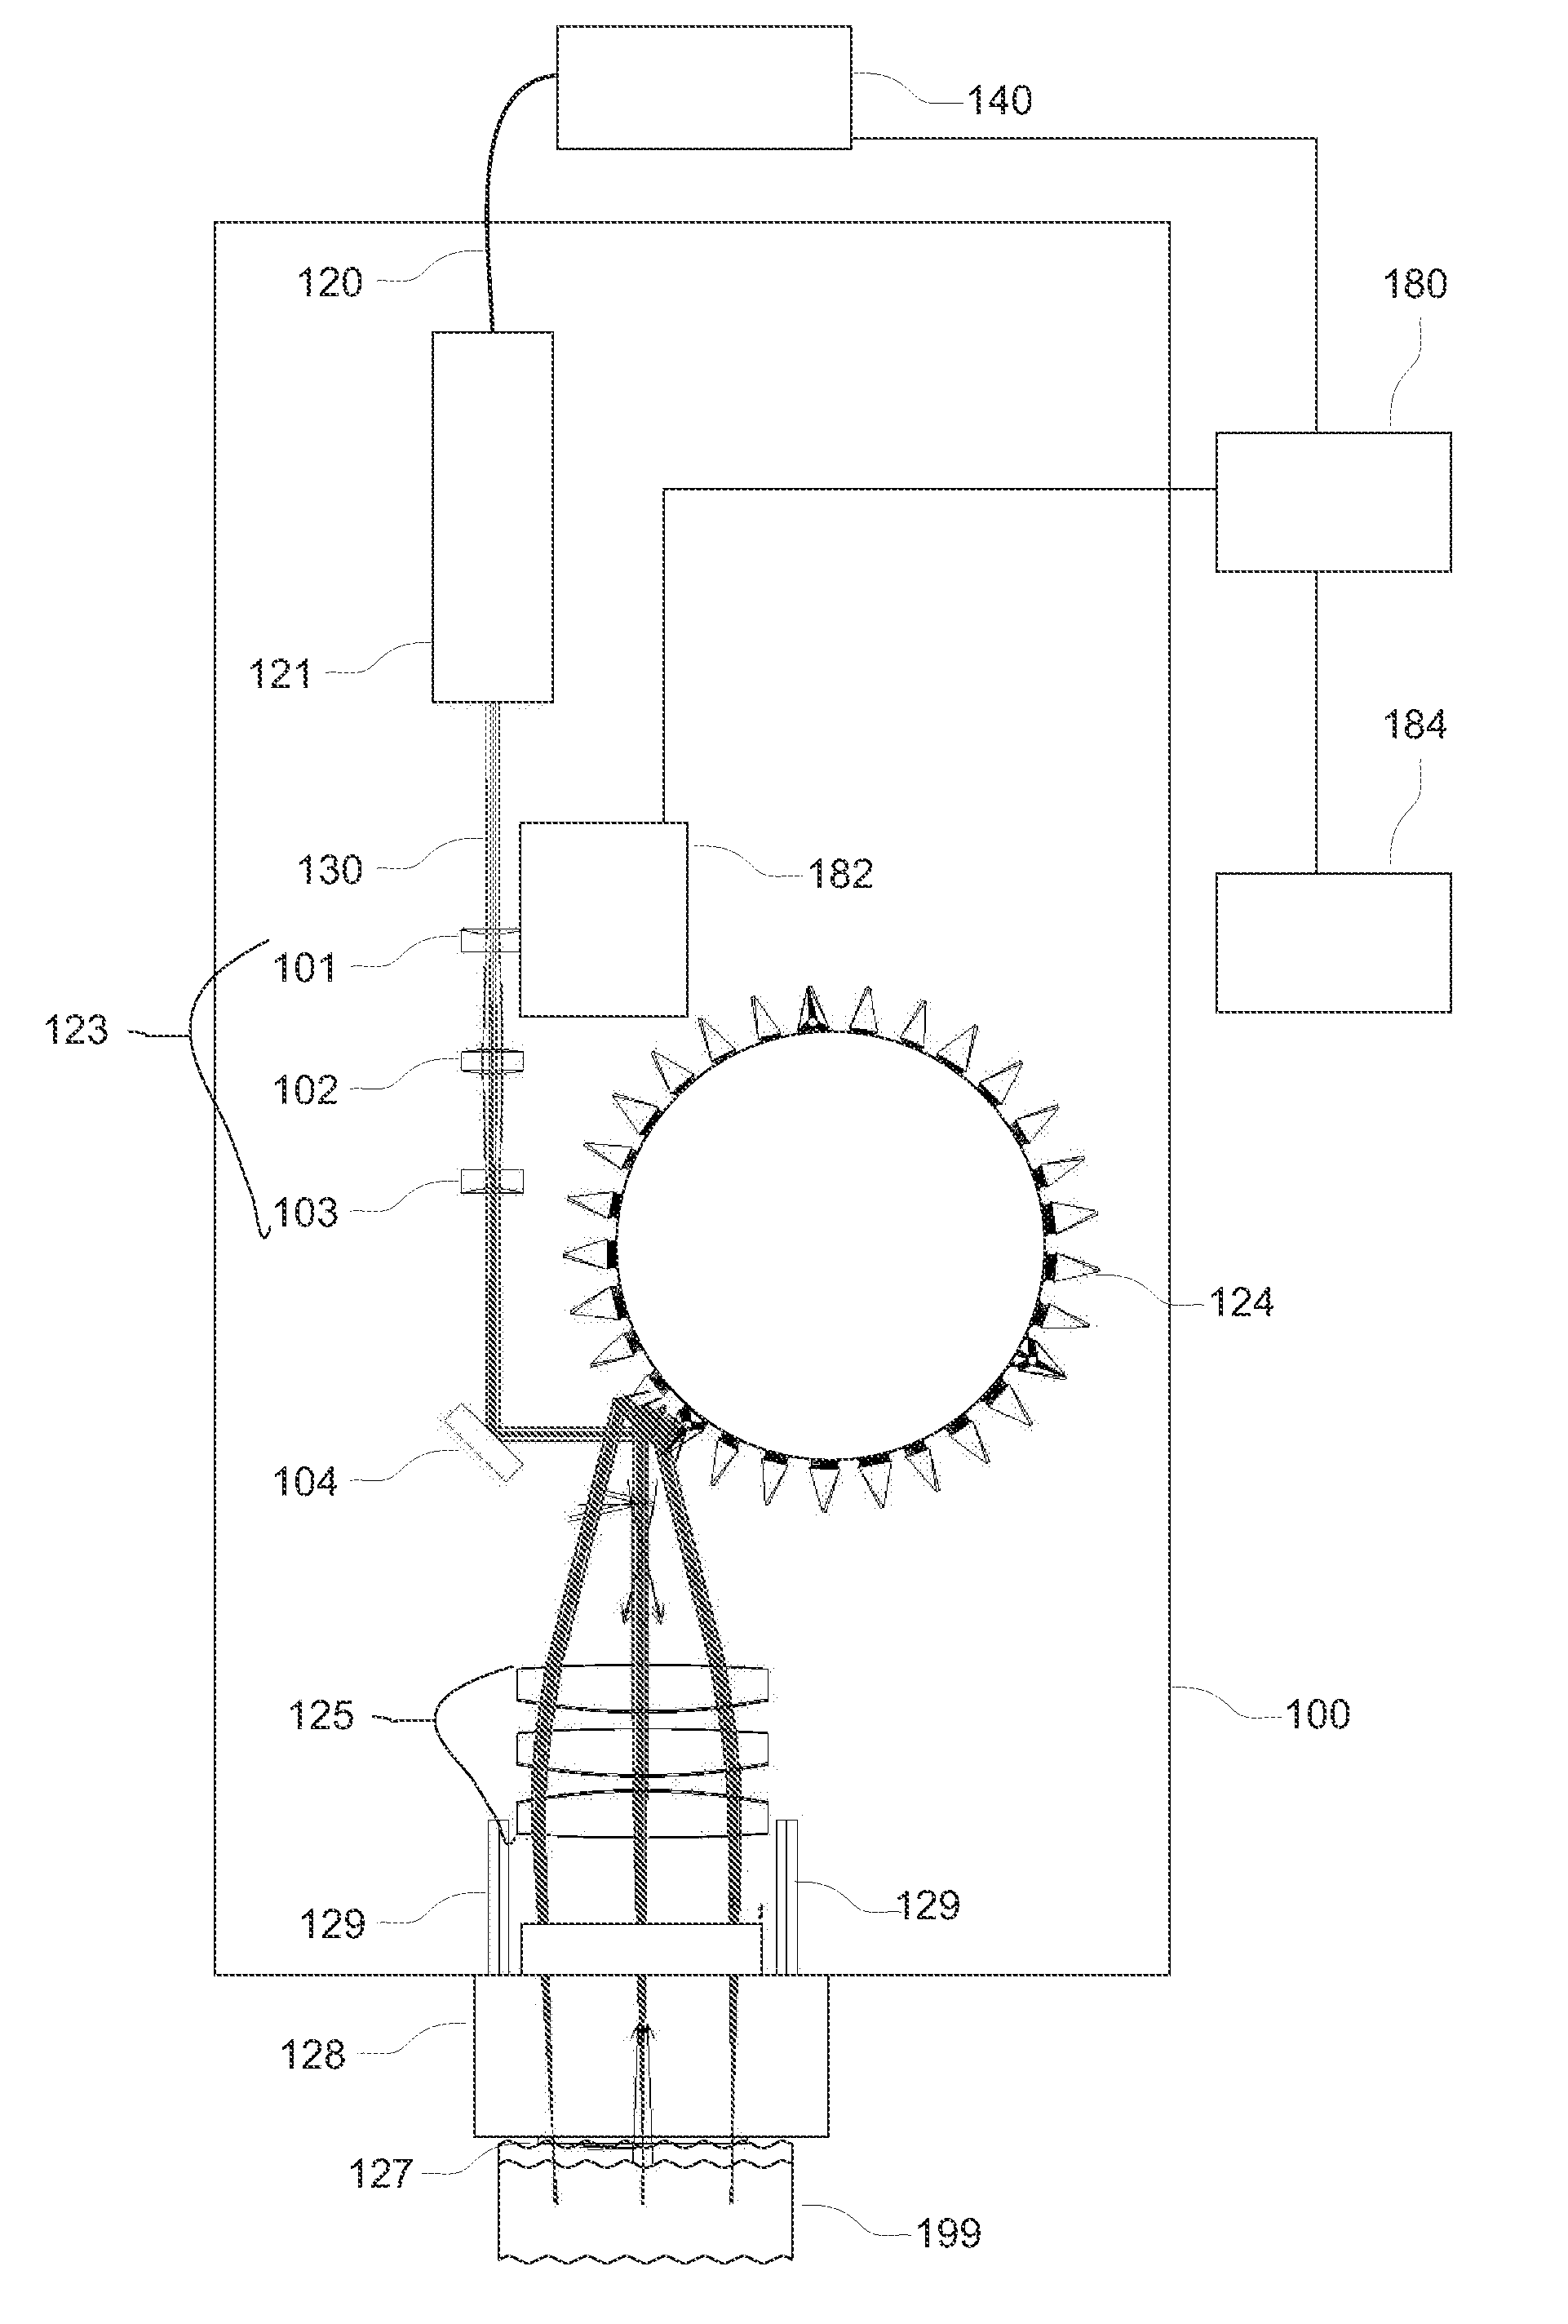 Apparatus and Method for Adjustable Fractional Optical Dermatological Treatment